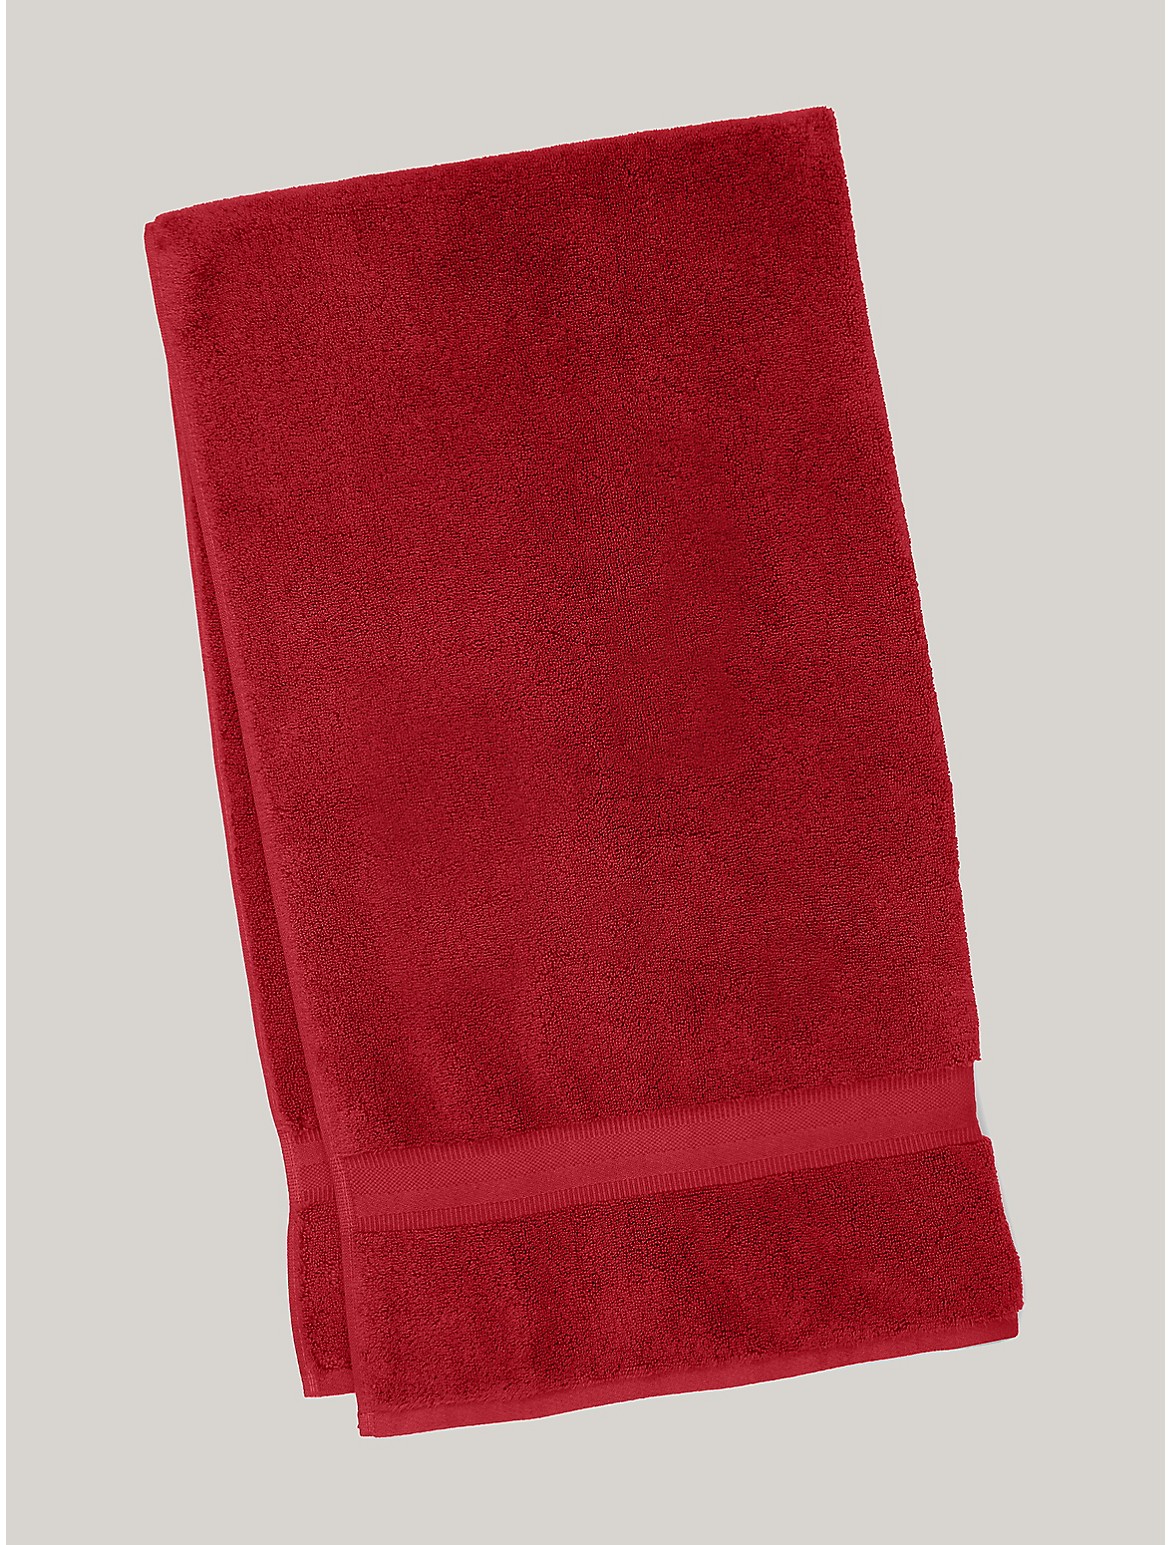 Tommy Hilfiger Signature Solid Bath Towel in Biking Red - Red